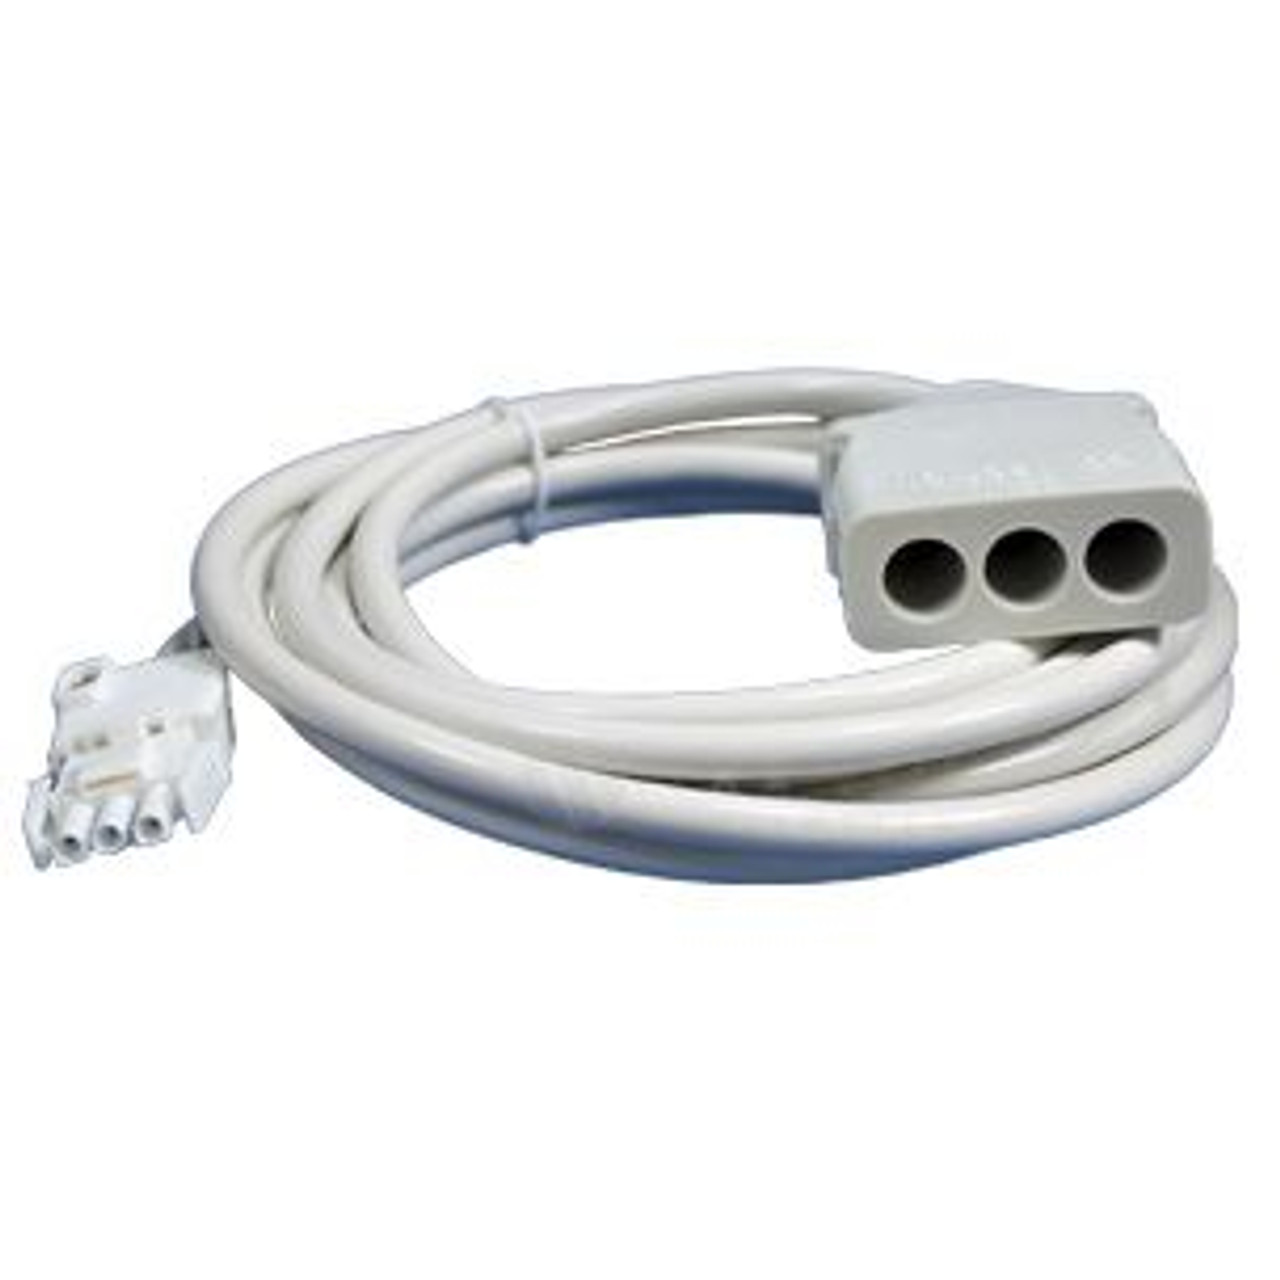 952-SVC 12 ft. Aquacal Cell Cord with 3 Pin Connector for Digital Nano Power Supply -  AUTOPILOT SYSTEMS LECTRAN